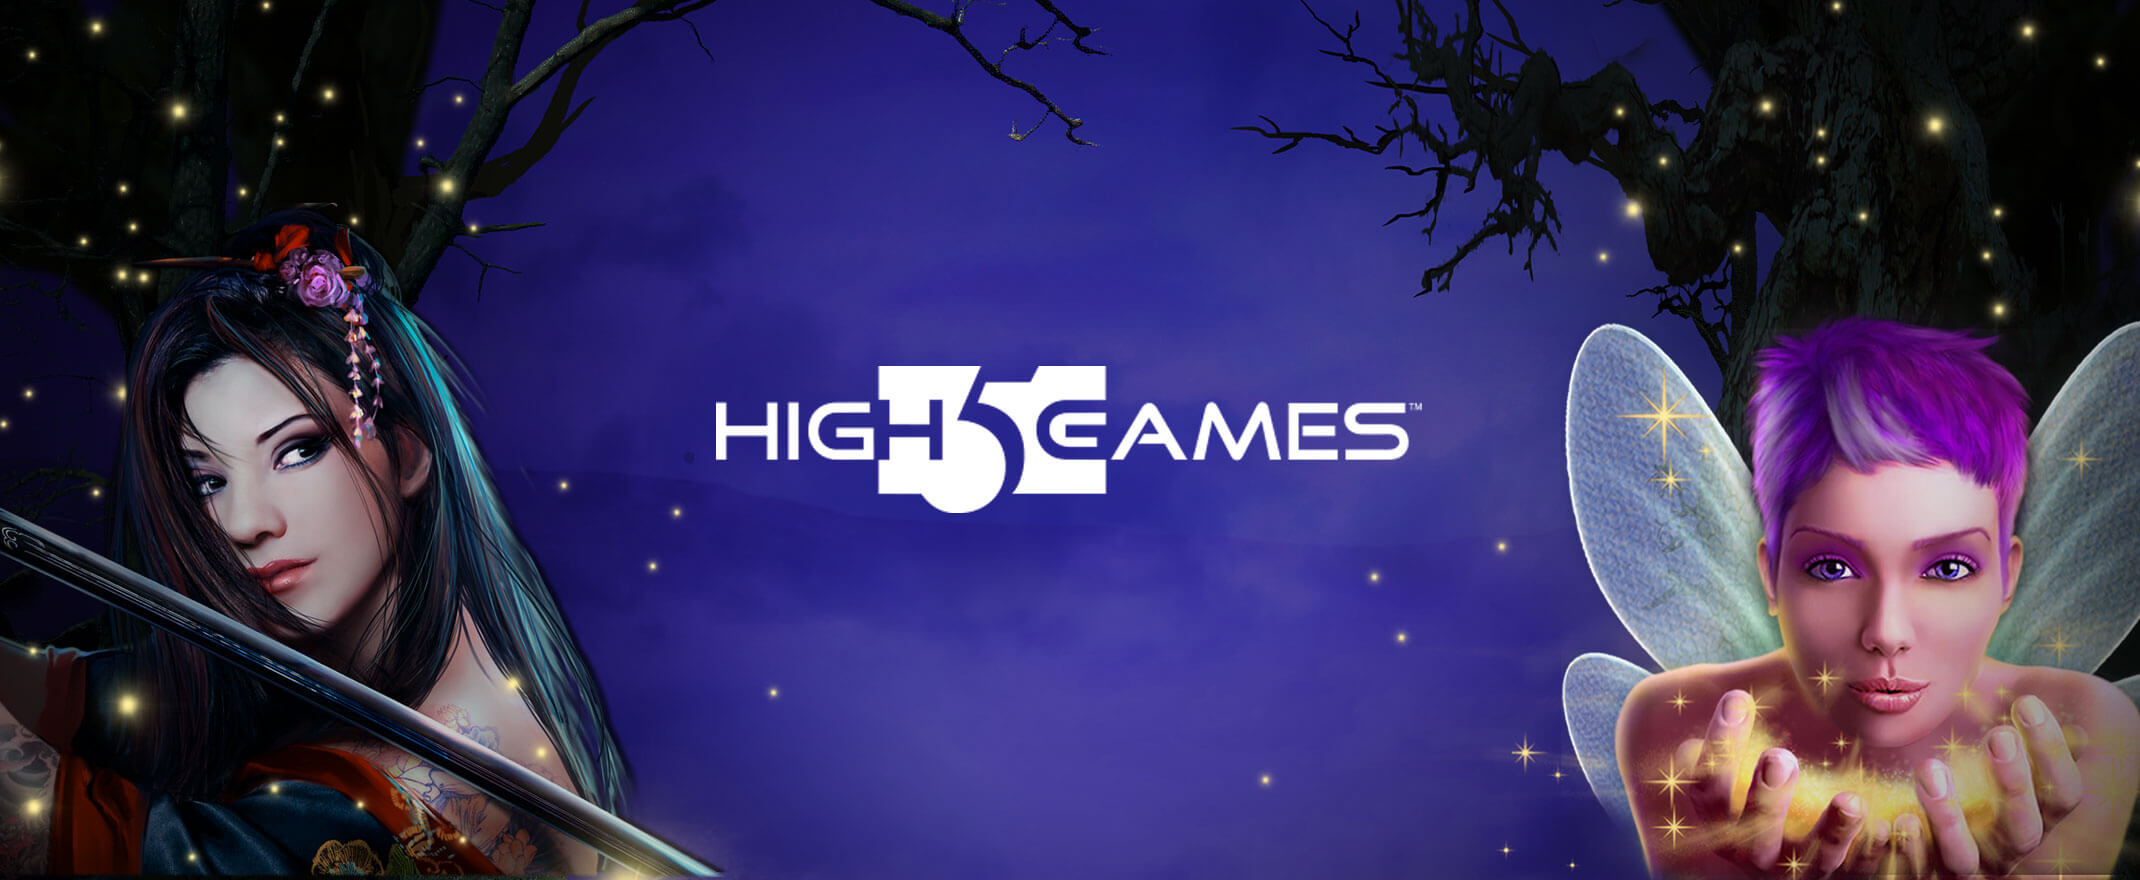 High 5 Games logo on purple background with 2 fairy characters